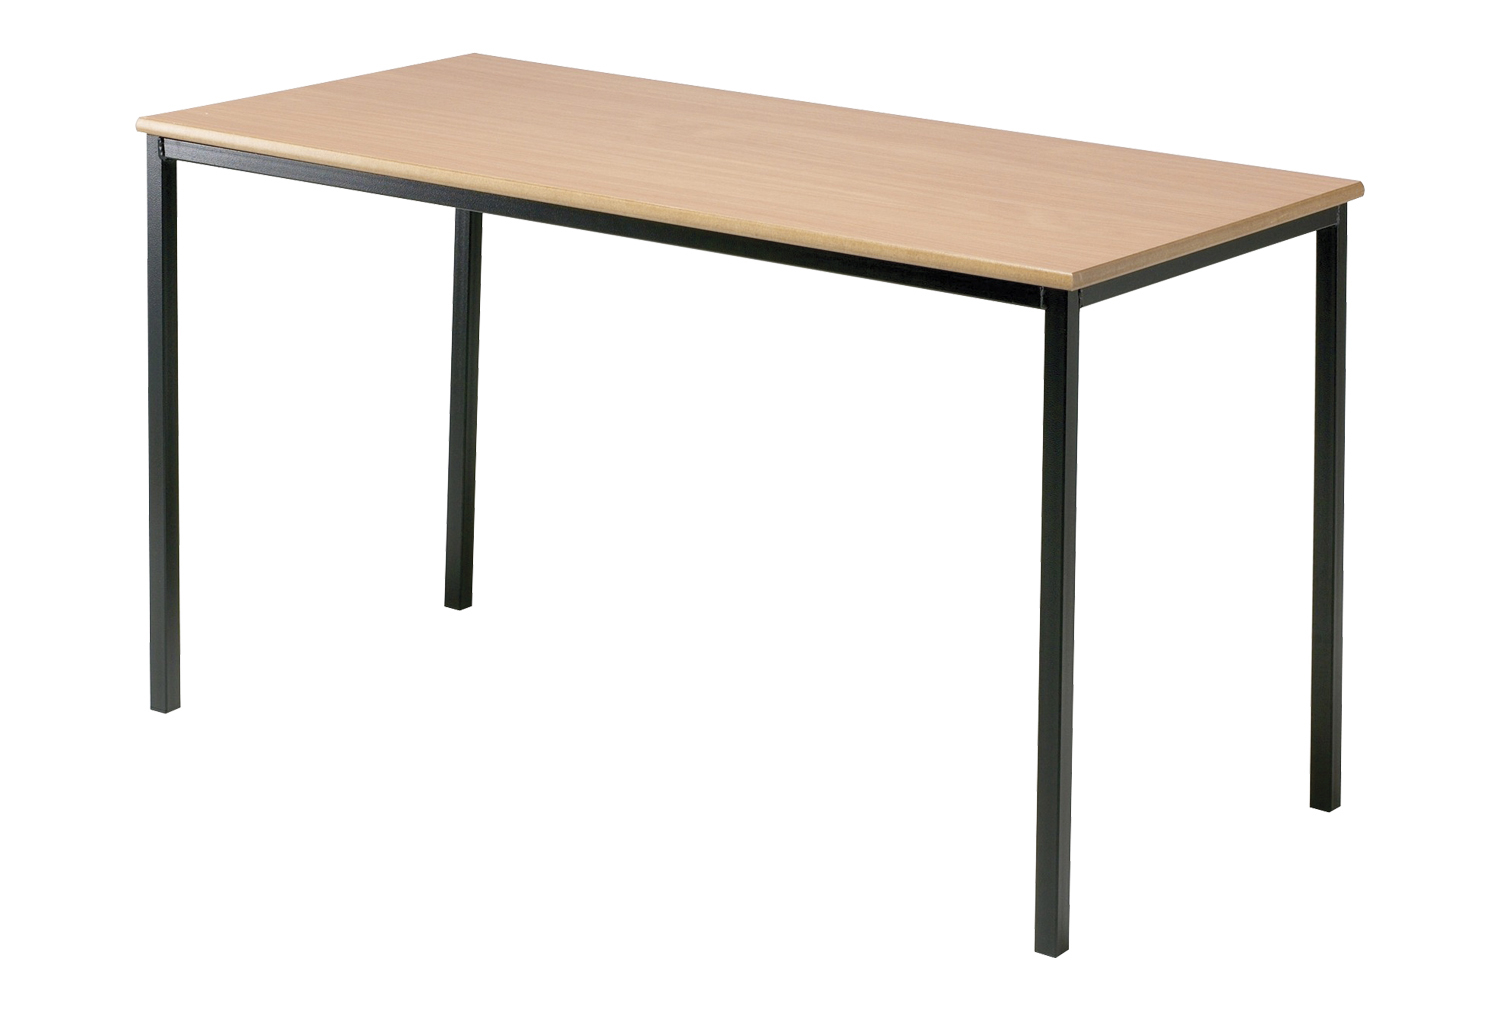 Qty 6 - Educate Fully Welded Rectangular Classroom Tables 14+ Years (MDF Edge), 120wx60d (cm), Light Grey Frame, Maple Top